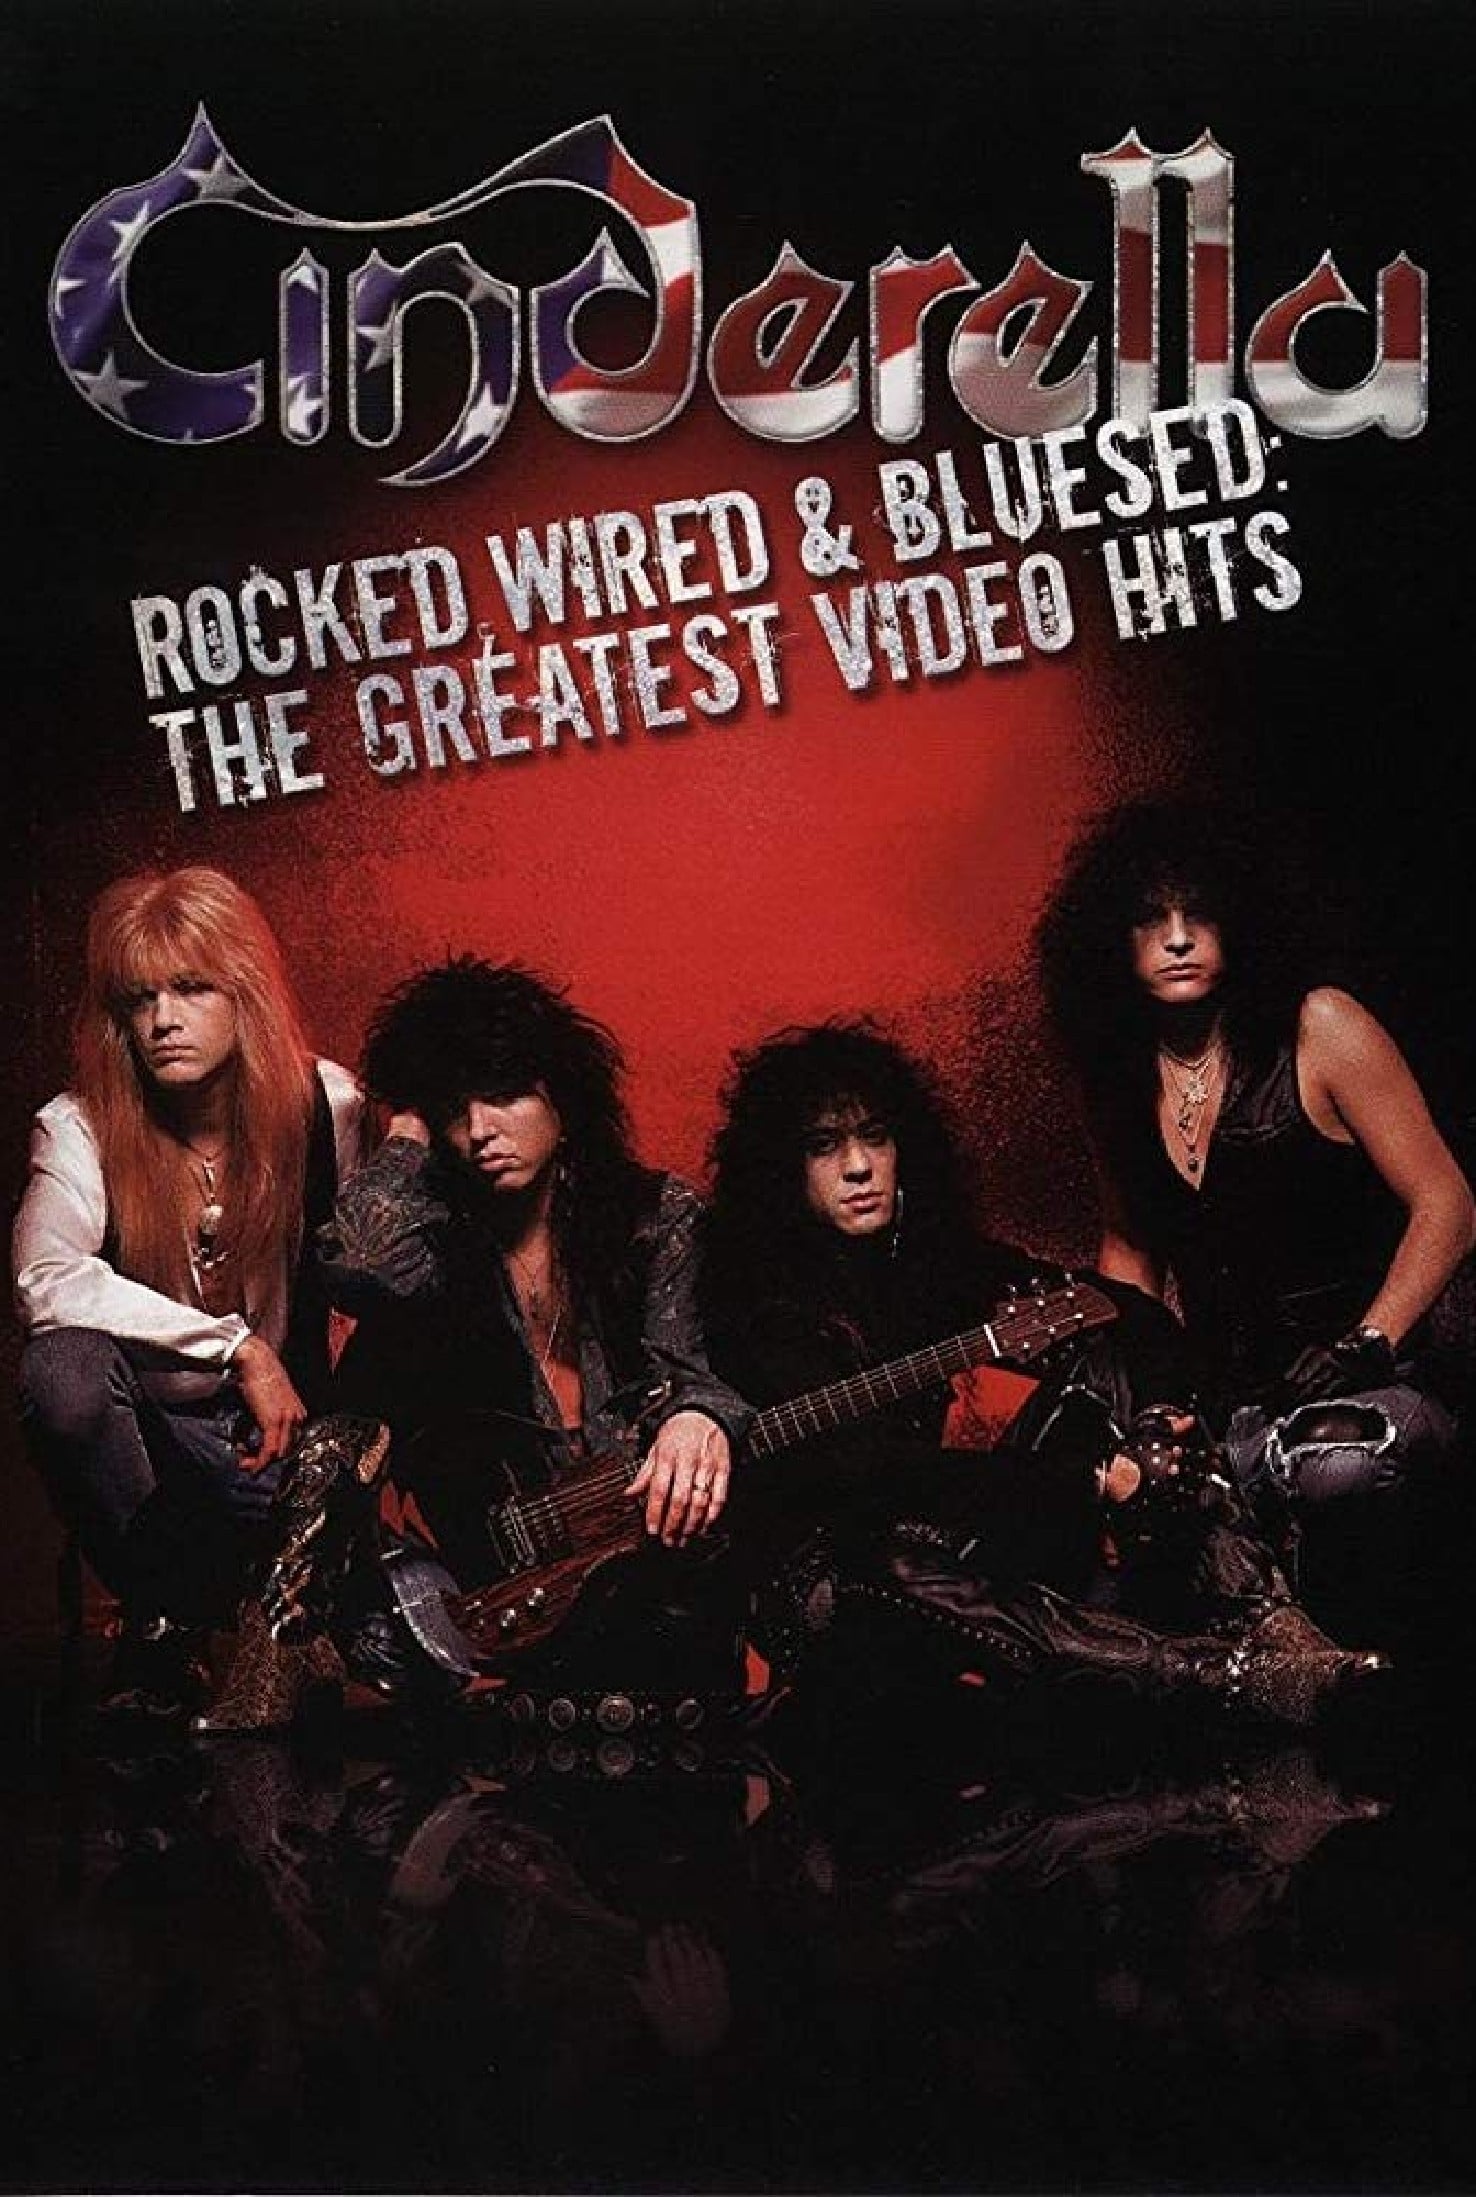 Cinderella: Rocked, Wired & Bluesed: The Greatest Video Hits (2005)